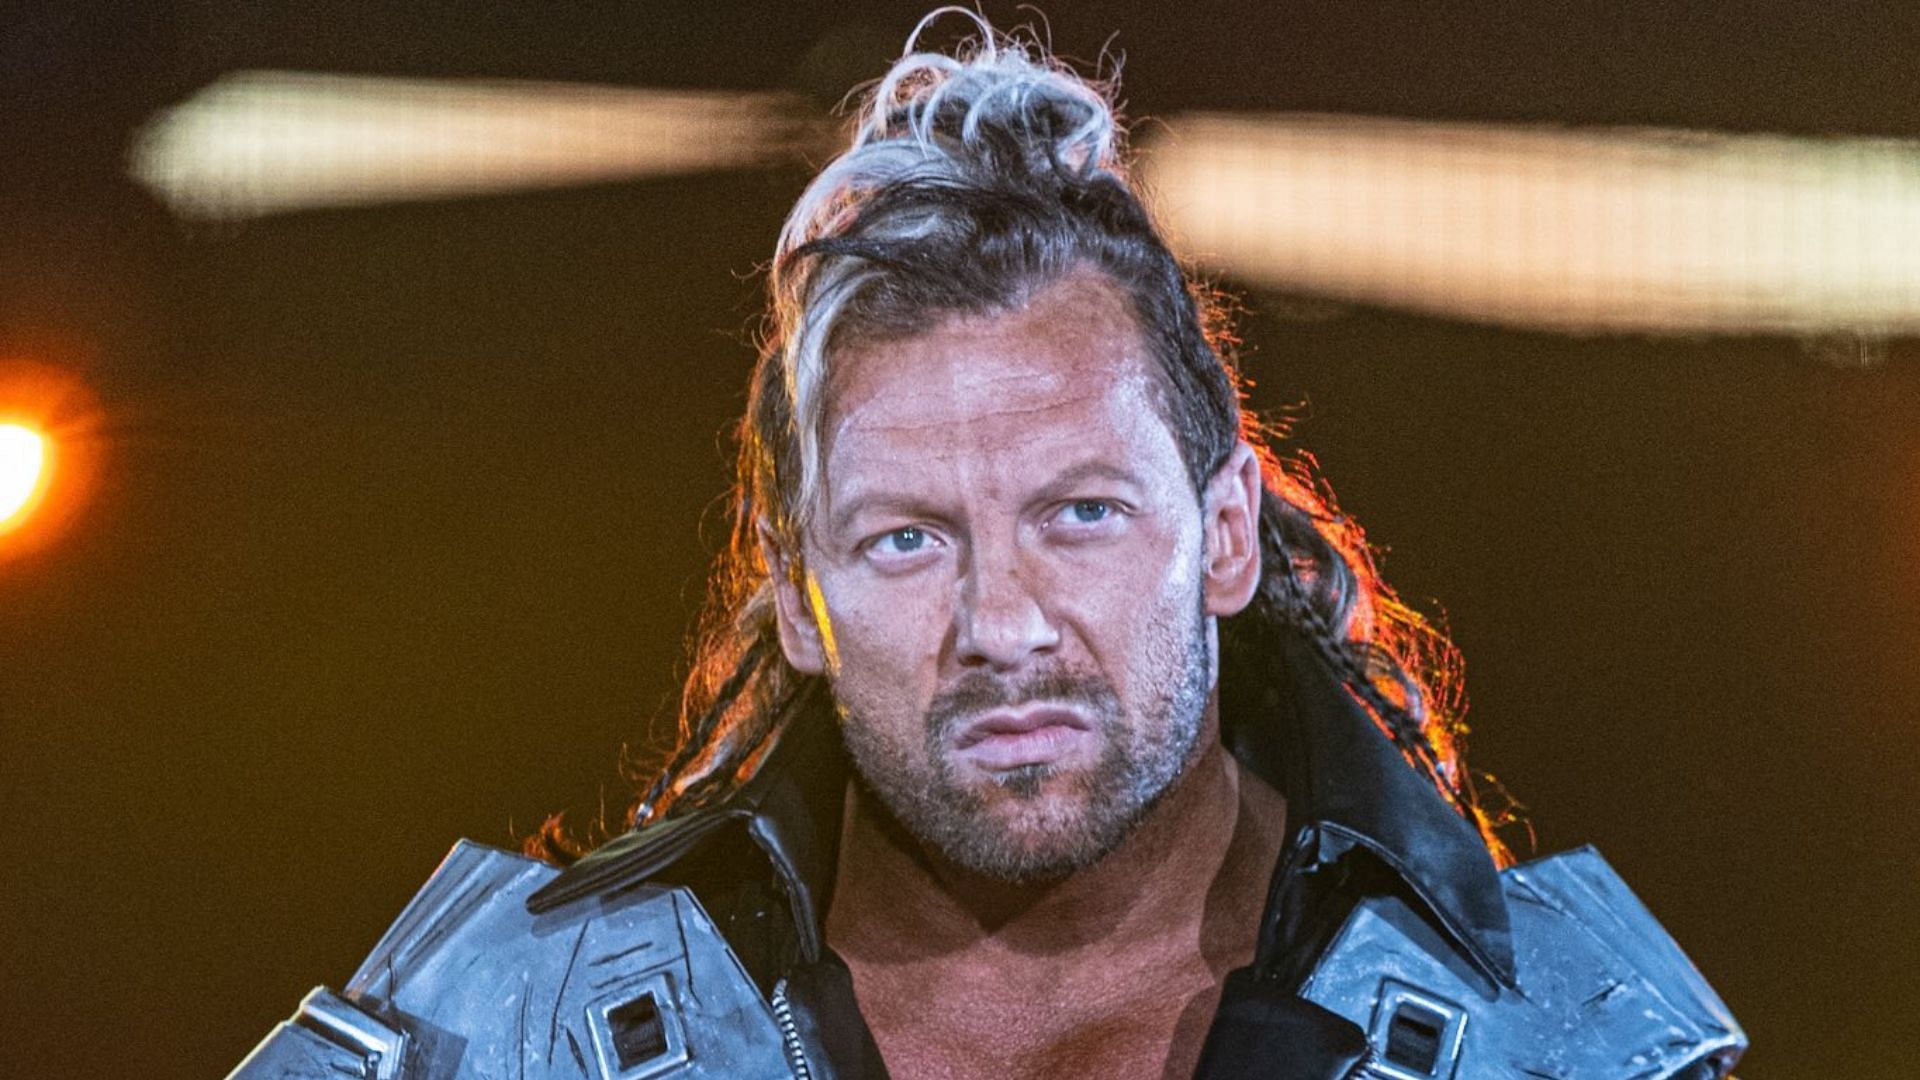 Kenny Omega has had his say on one of AEW